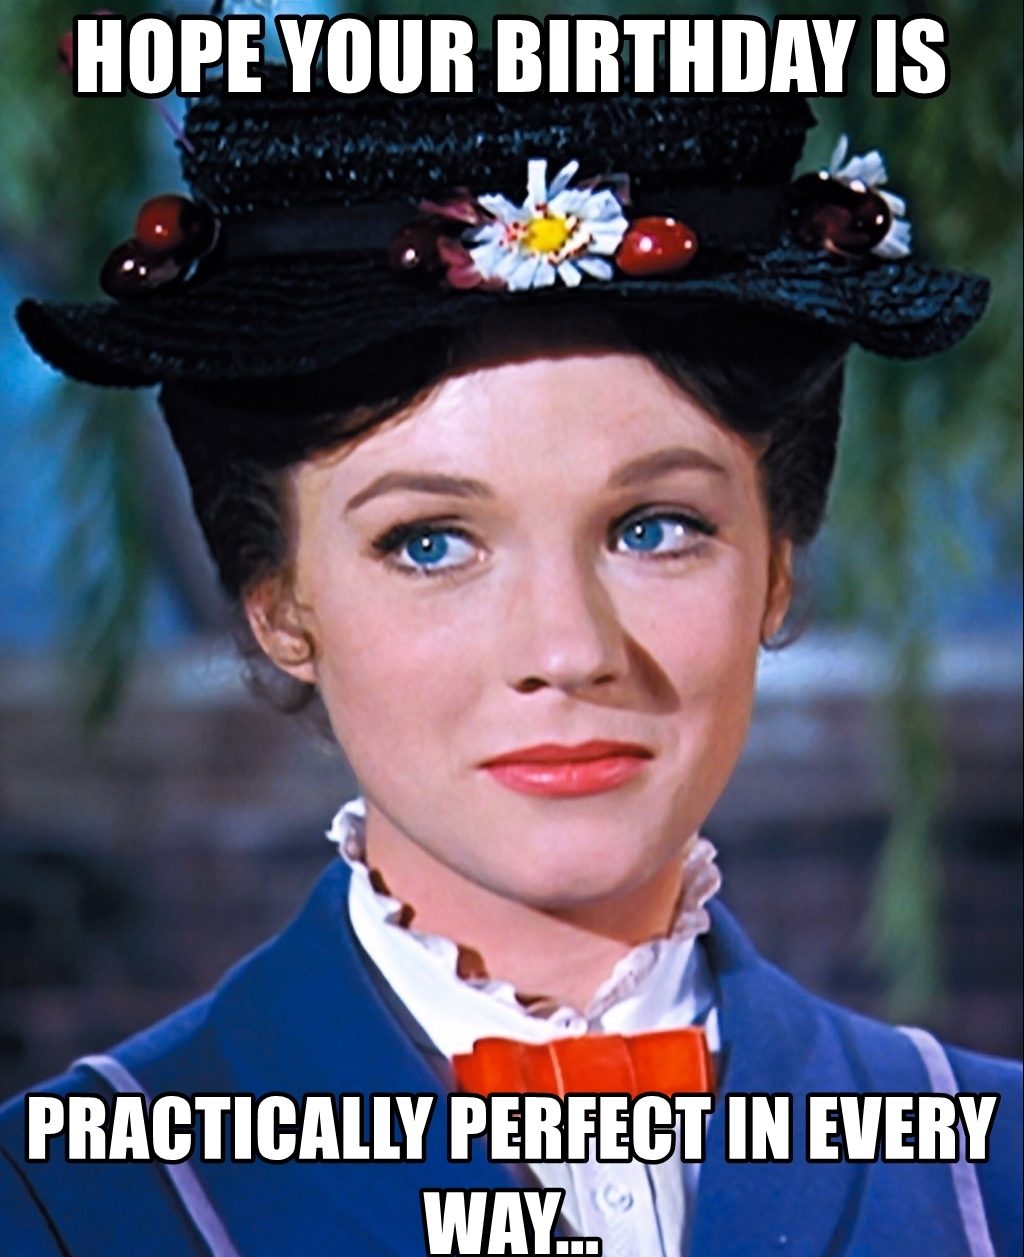 hope-your-birthday-is-practically-perfect-in-every-way